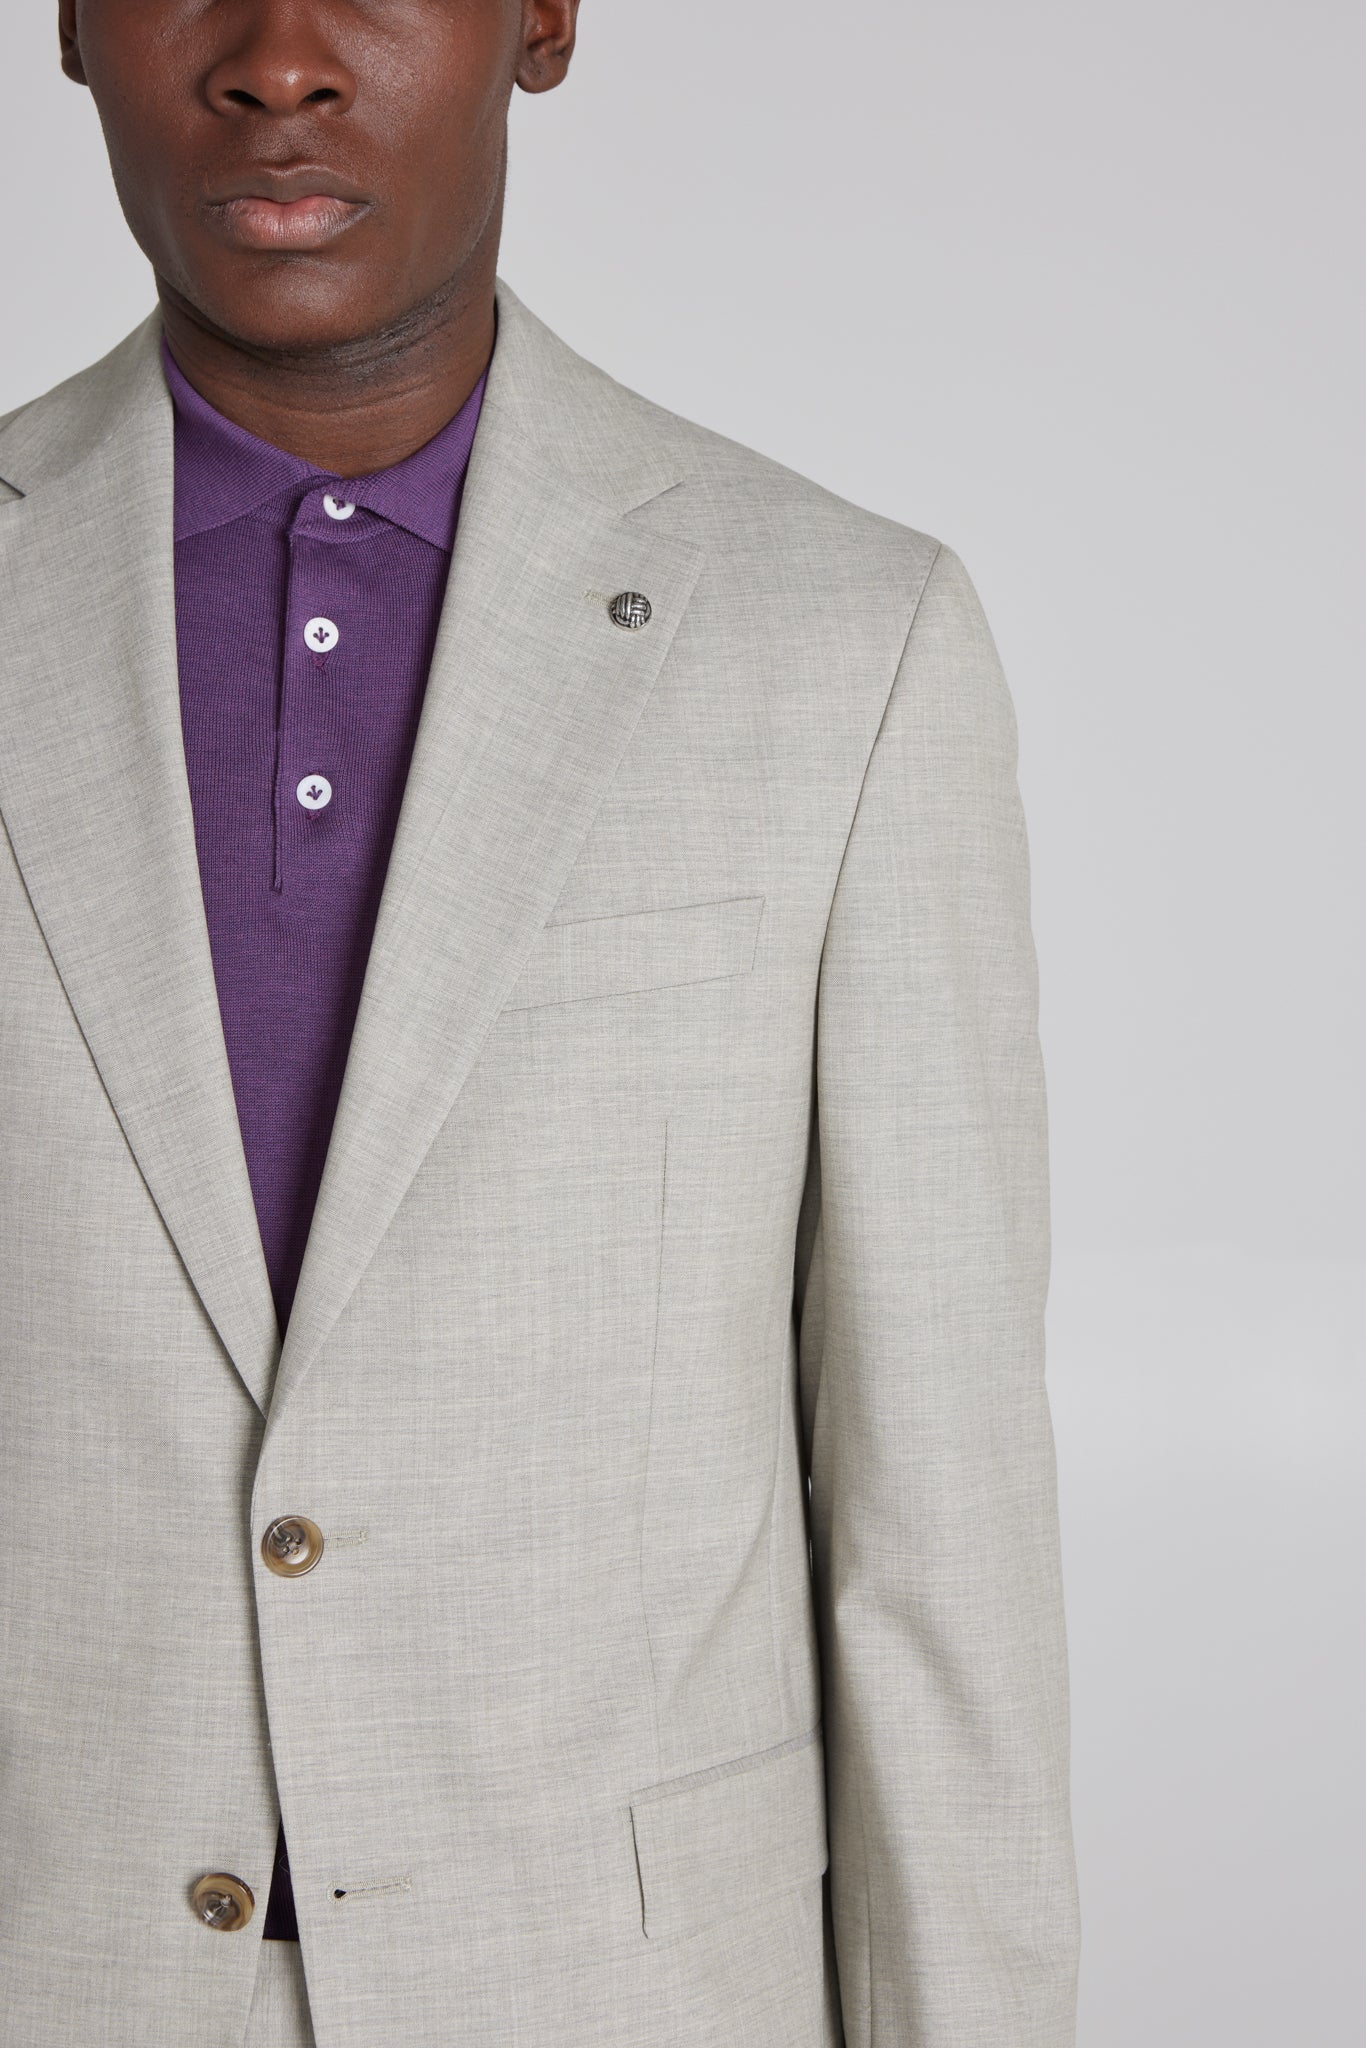 Alt view 2 Midland Solid Wool Suit in Taupe